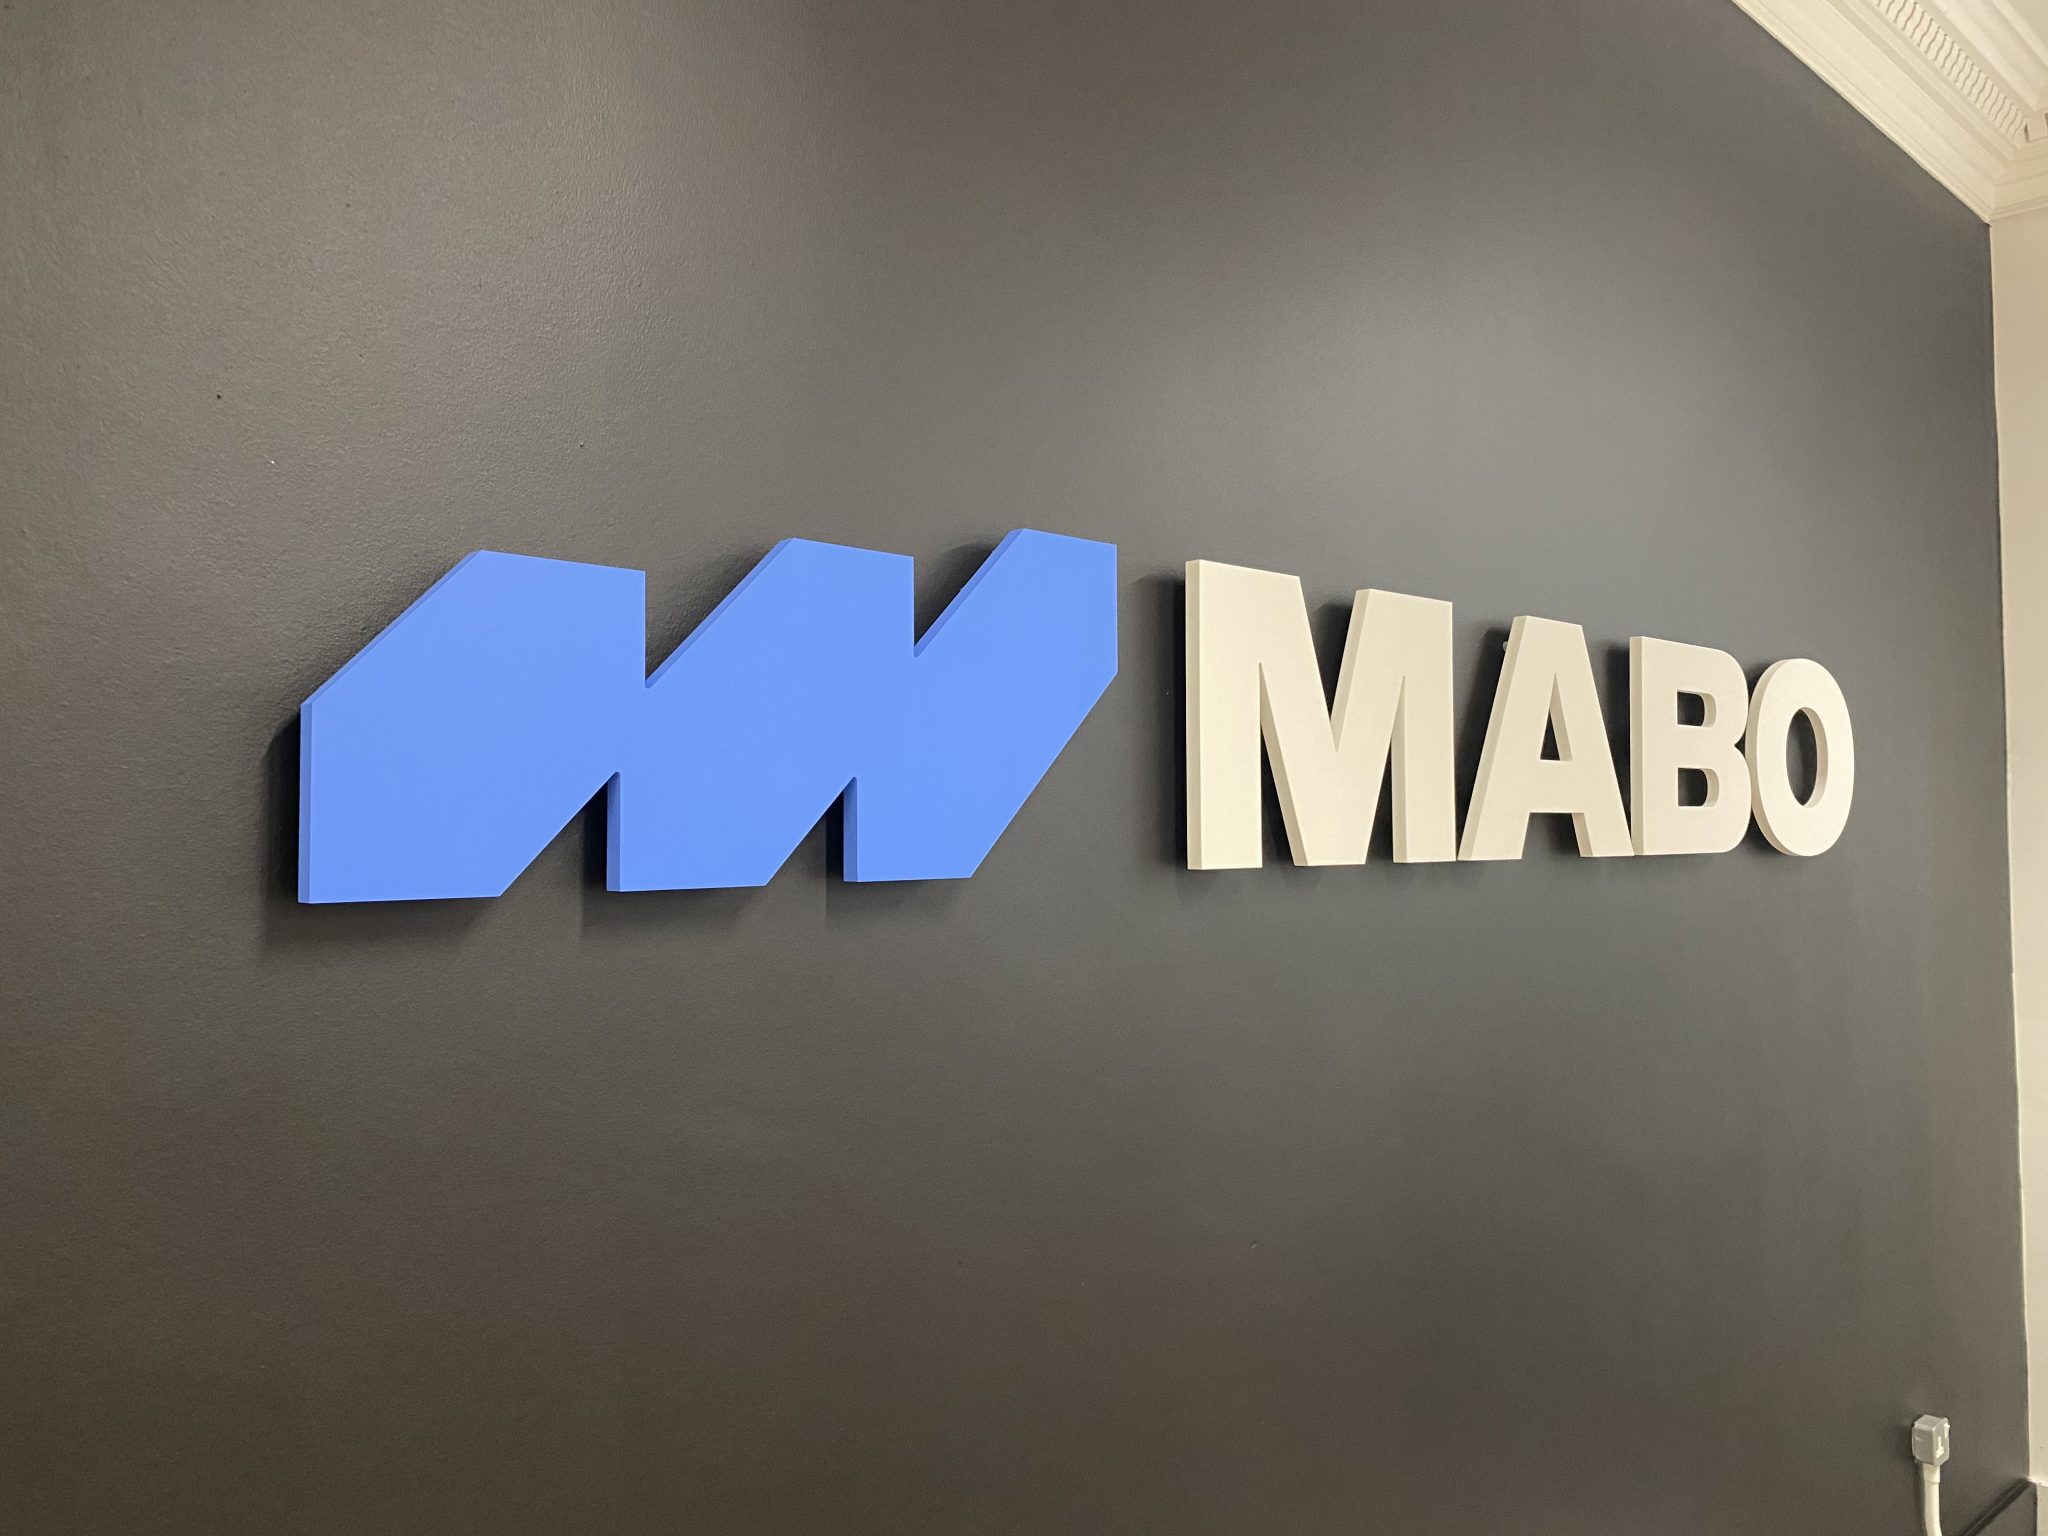 another photo of the new mabo wall signage. Made of 3d cut letters, the mabo logo is proudly displayed on this feature wall in the mabo office